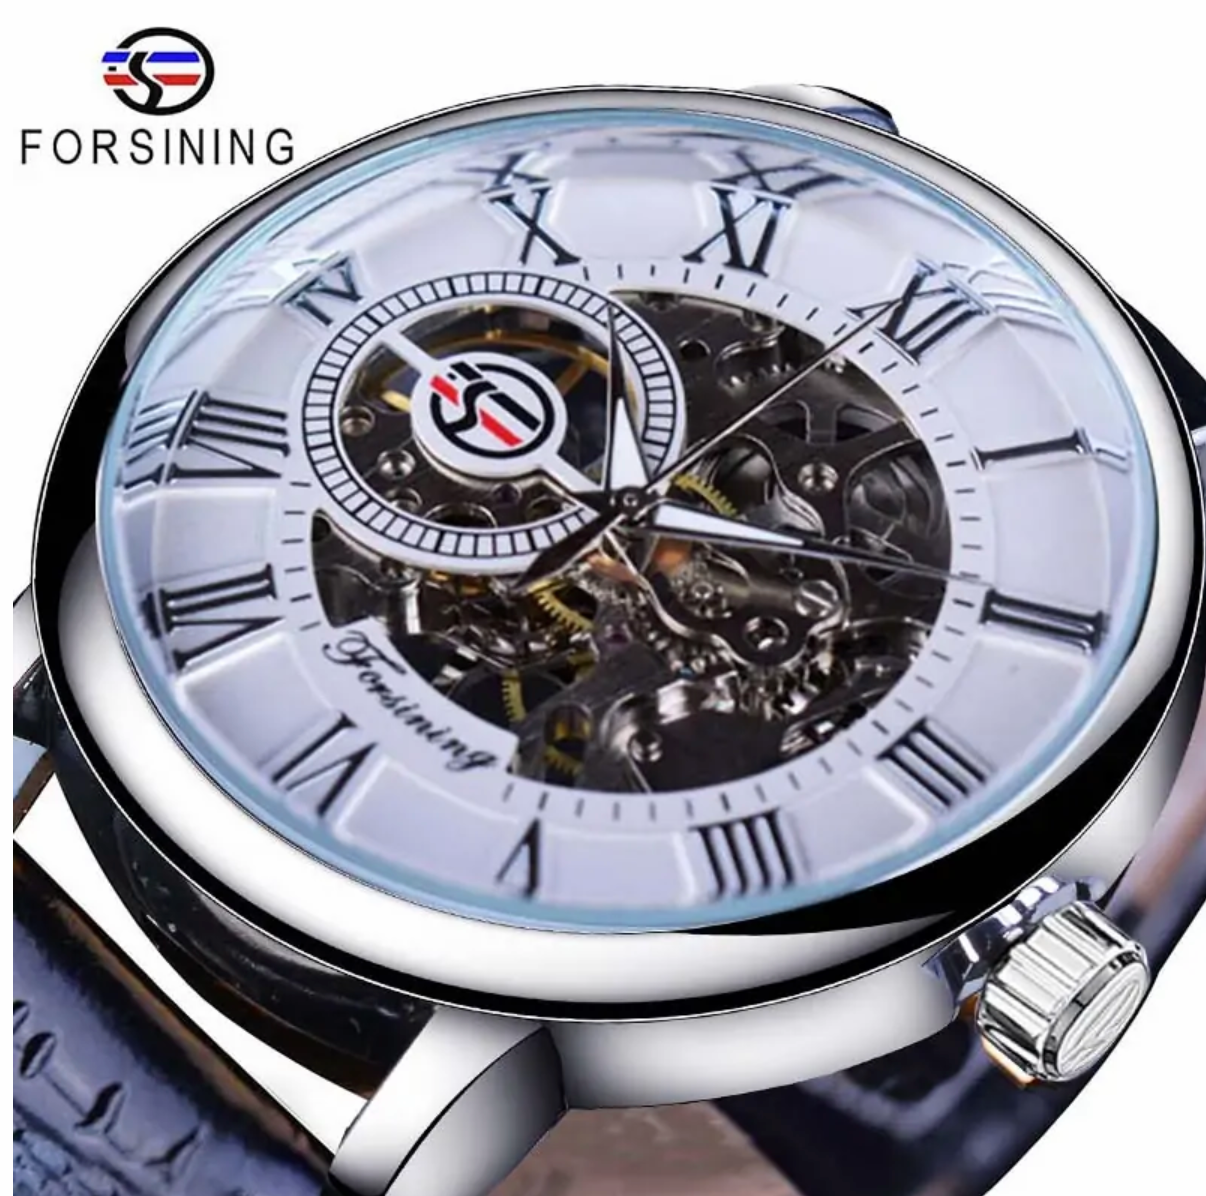 Forsining Tourbillion Classic Automatic Watch With Golden Bezel, Editable  Calendar Display, And Genuine Leather Strap Top Brand For Men Lu1991 From  Ai825, $90.78 | DHgate.Com